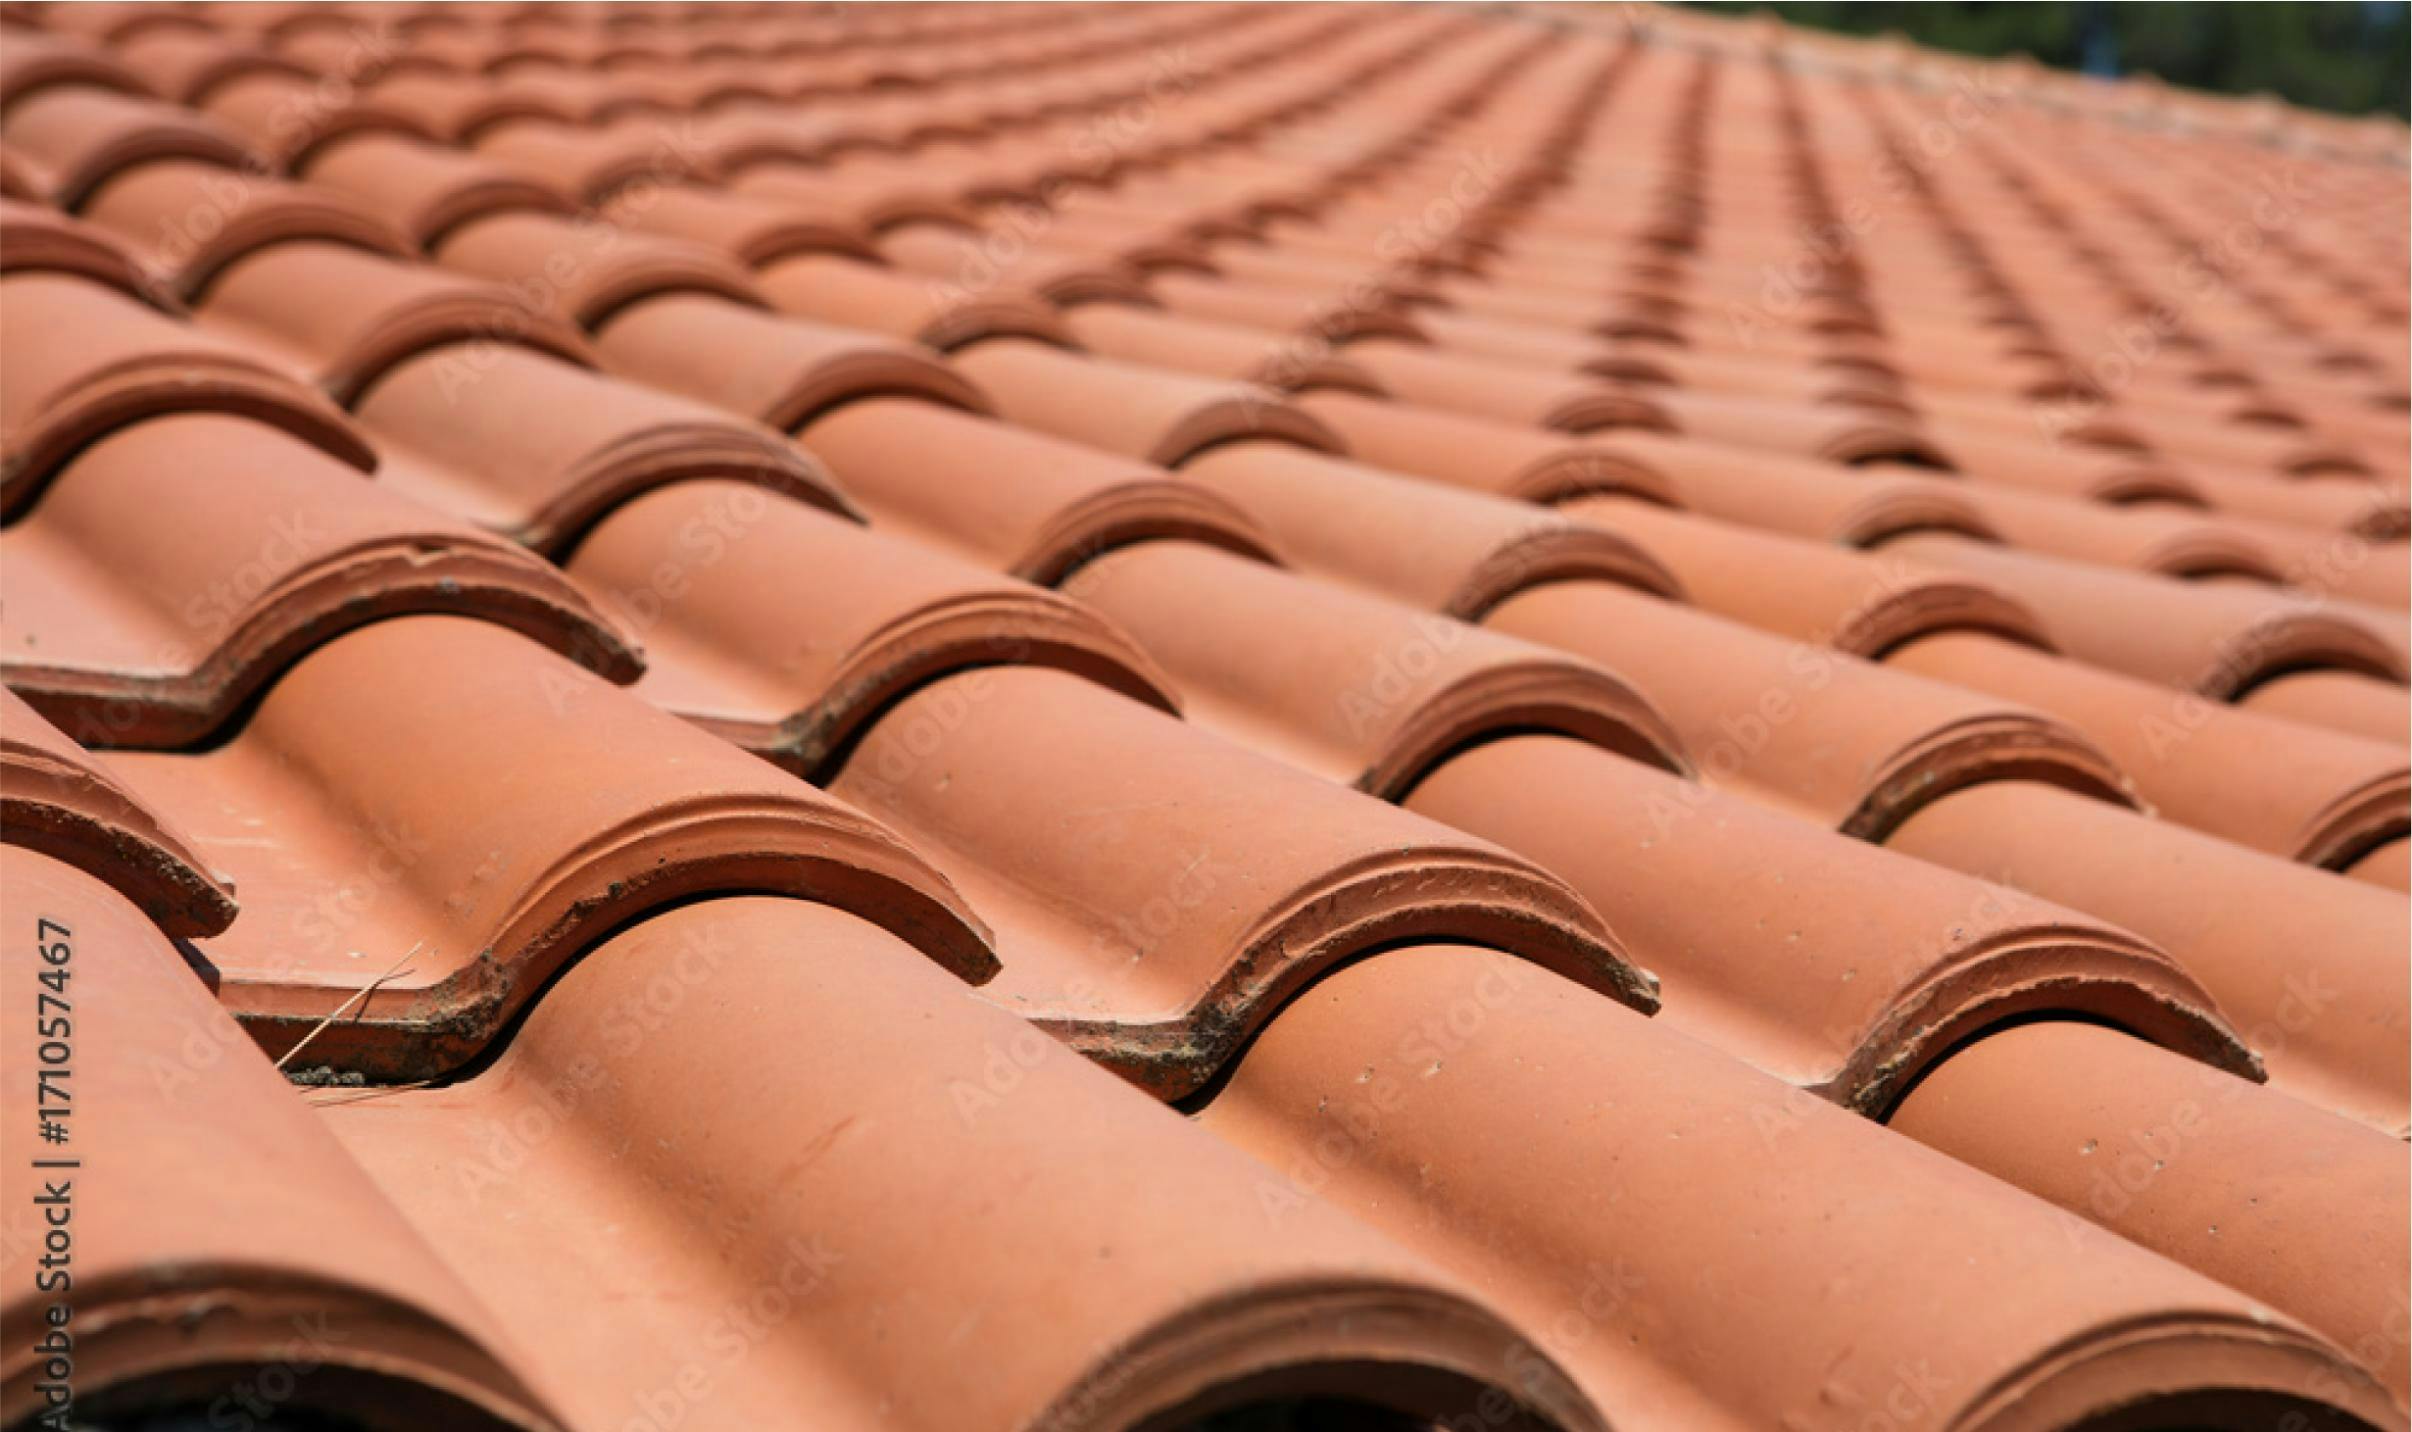 Specialty Roofing | Terracotta Roof Tile Specialty Roofing | Specialty Residential | Specialty Commercial